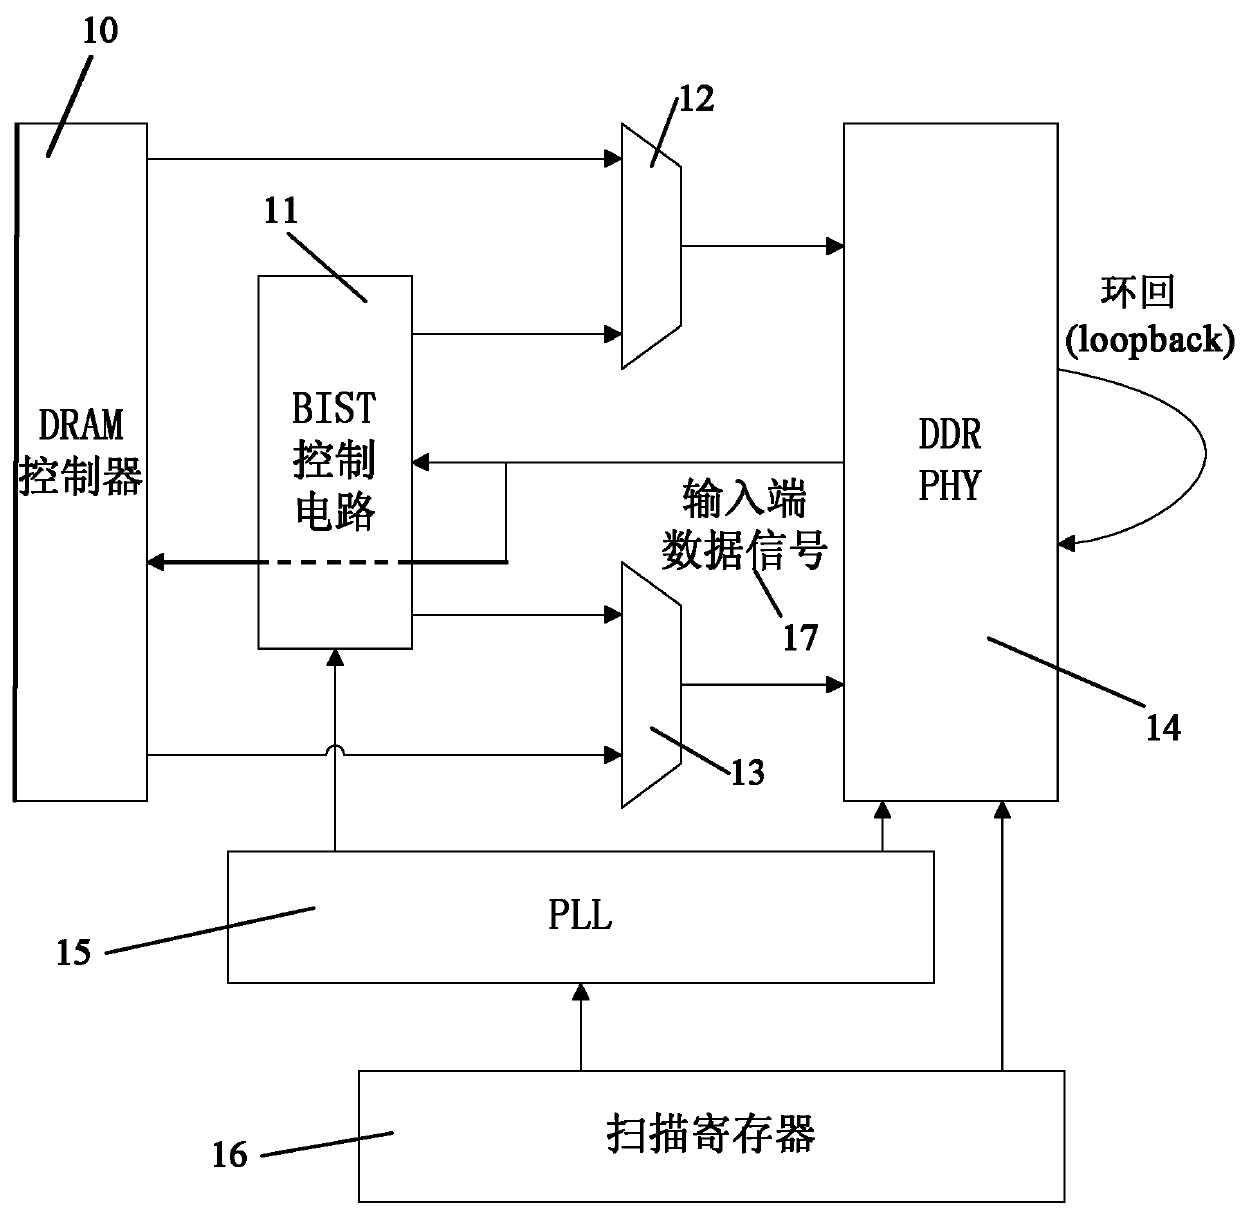 BIST (Built-in Self-test) automatic test circuit and test method aiming at PHY (Physical Layer) high-speed interface circuit